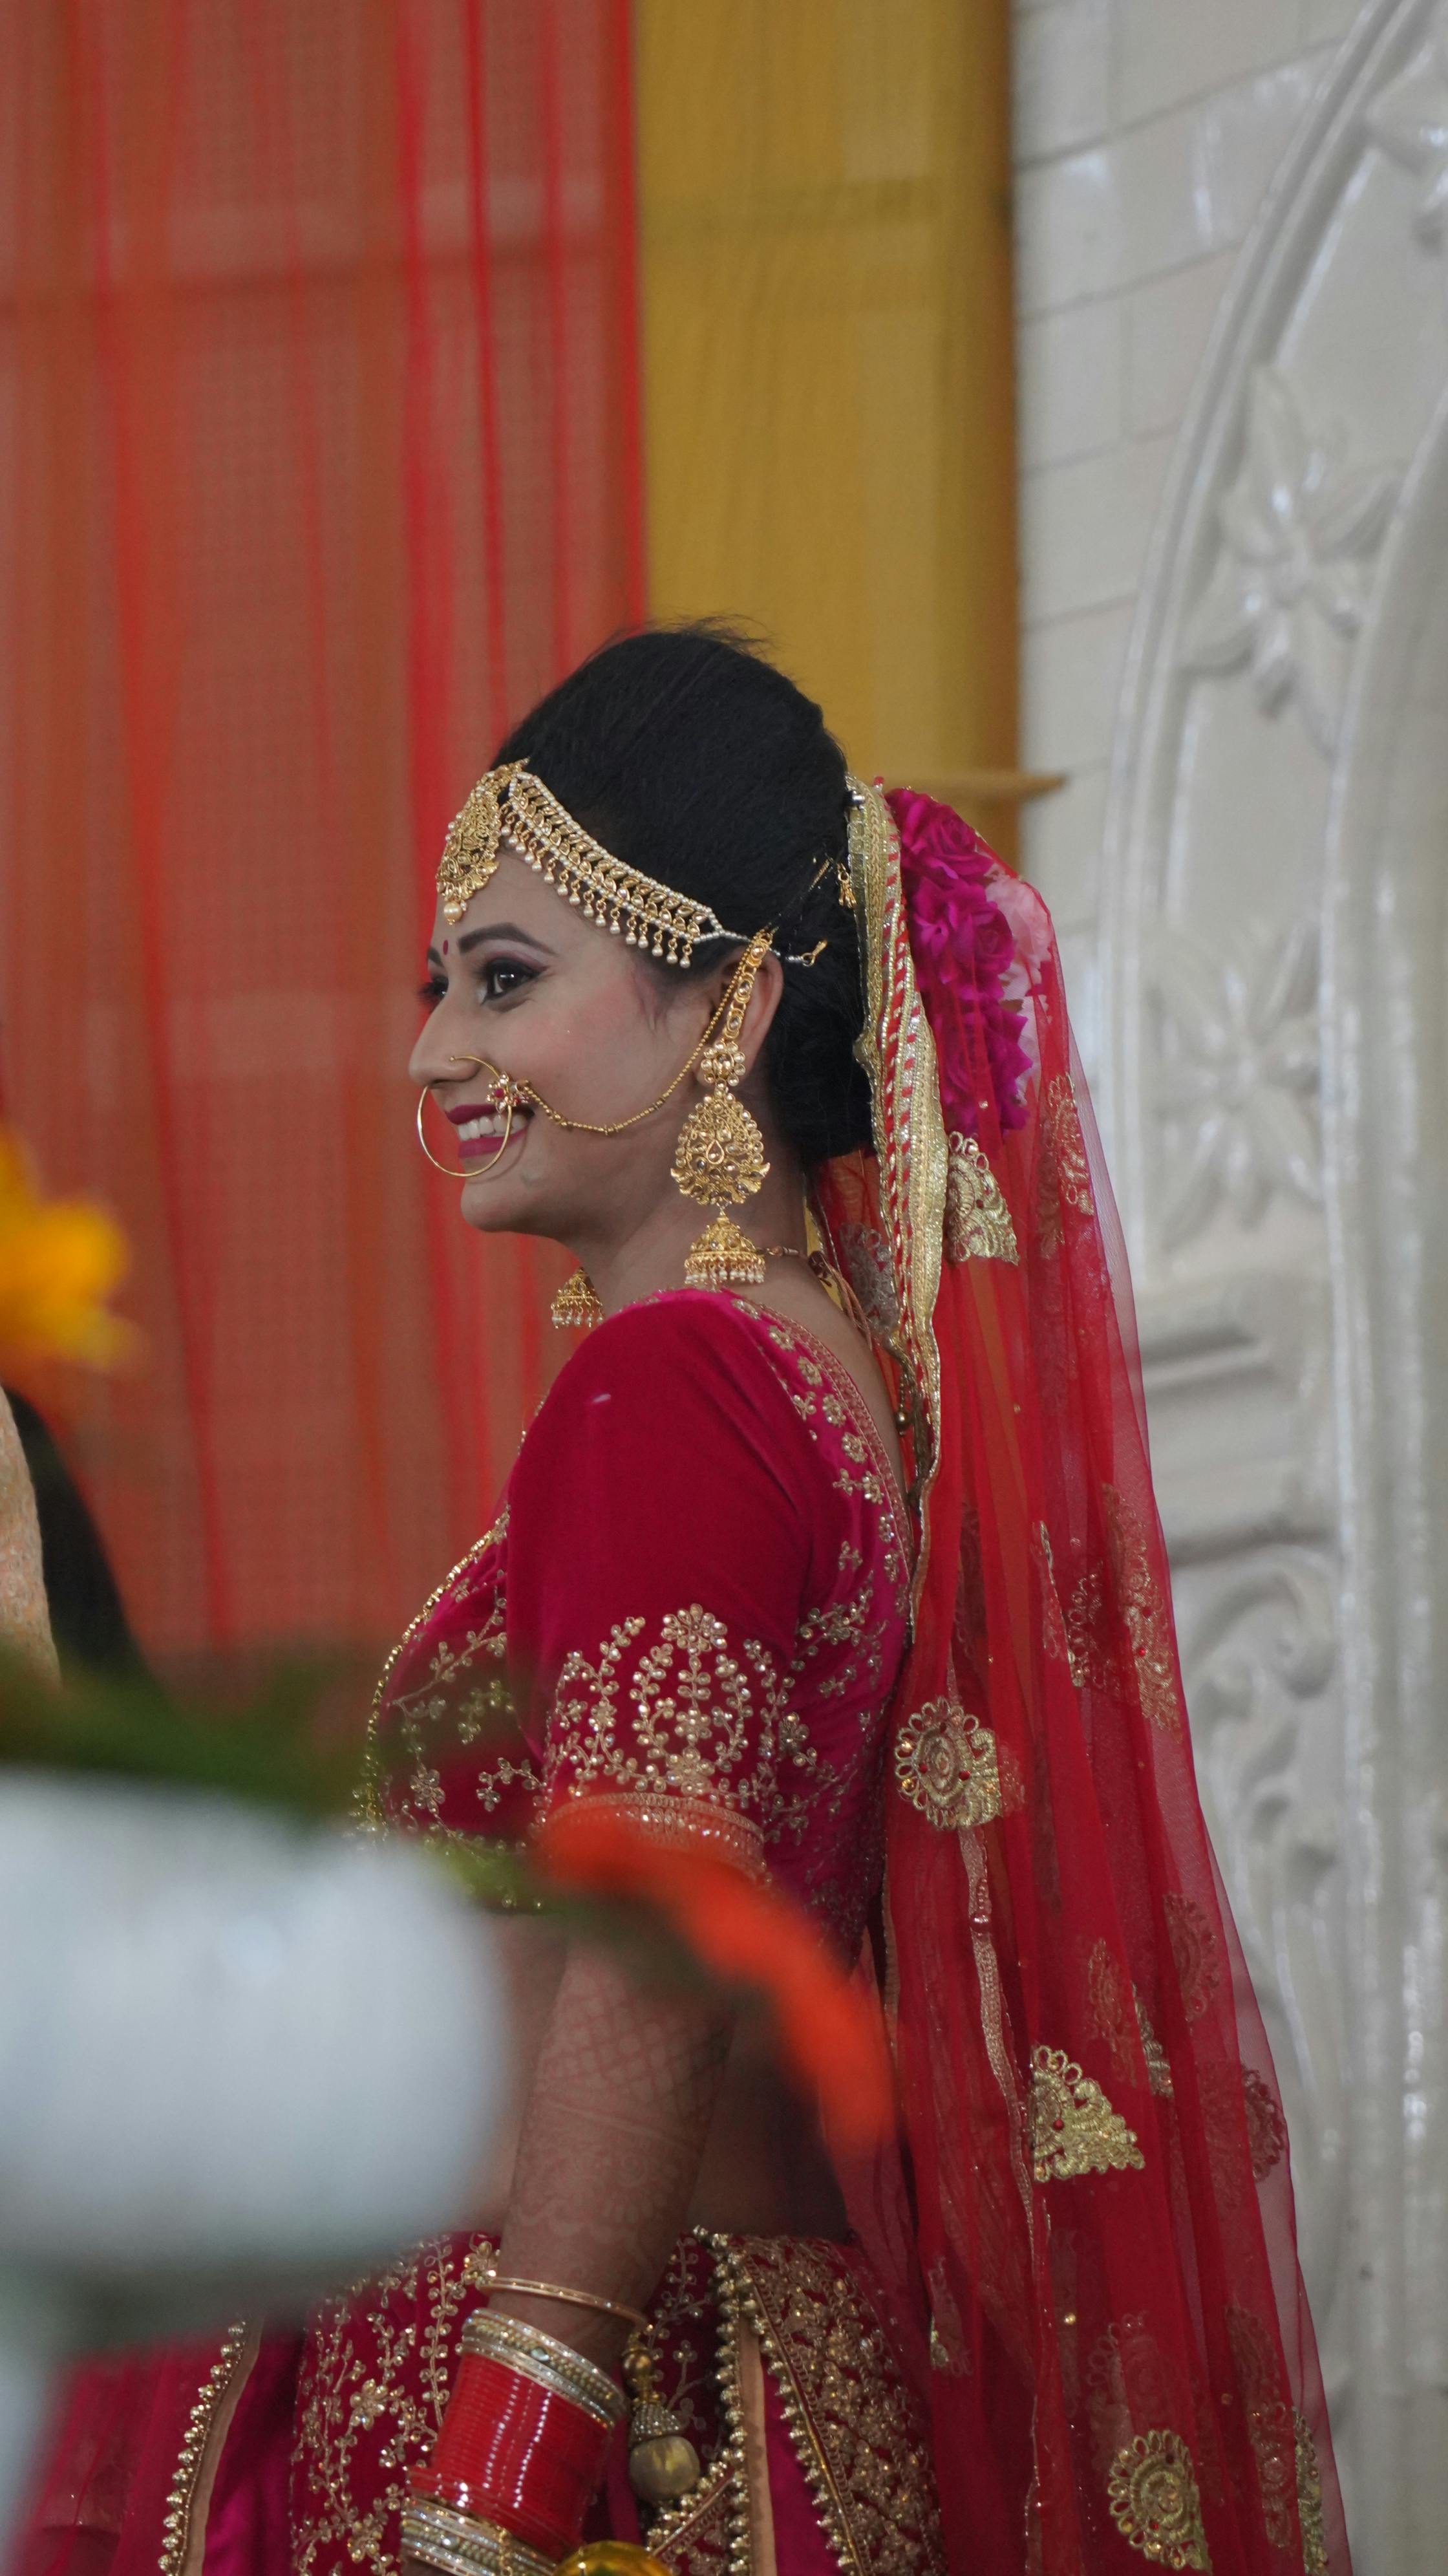 Free stock photo of bride, indian bride, marriage